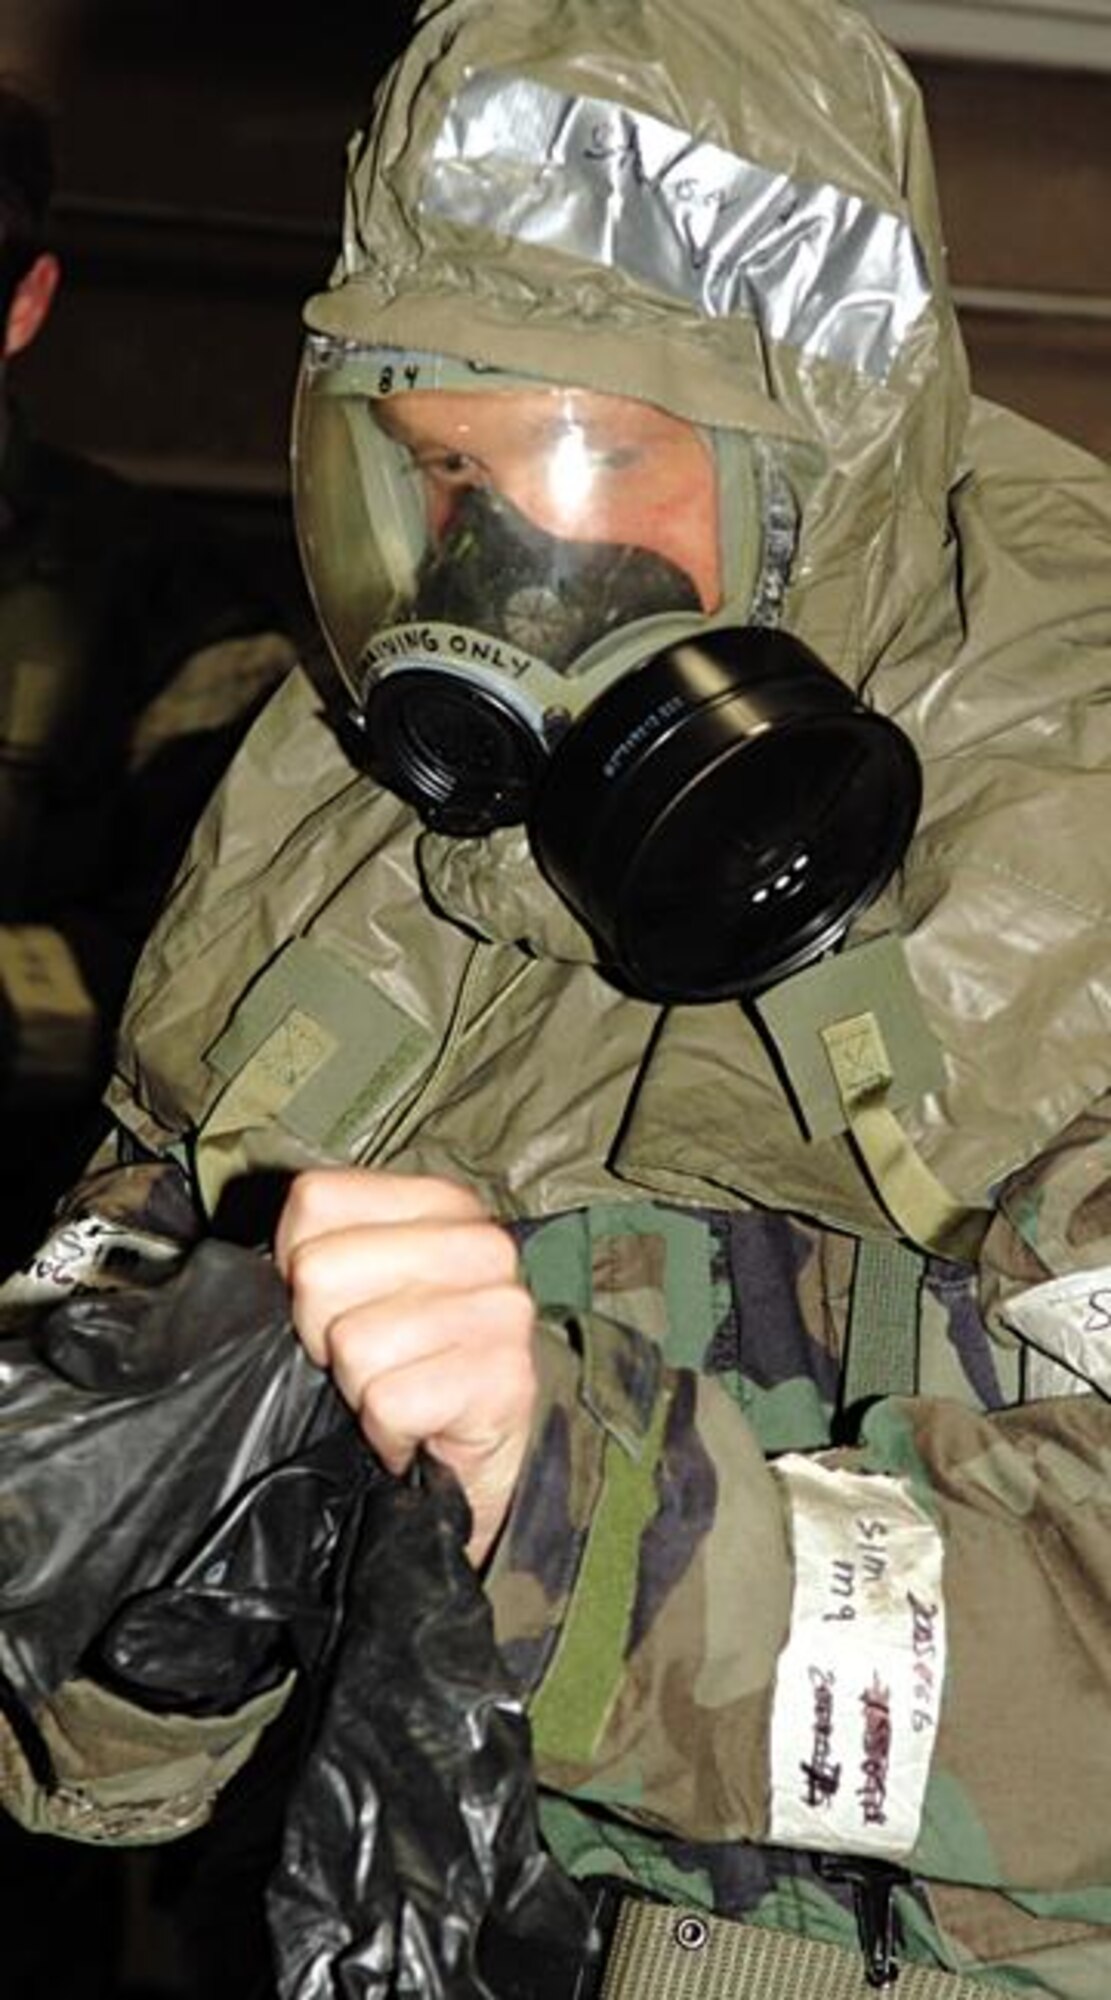 Senior Airman Keith Stetser, 28th Communications Squadron, 28th Bomb Wing, Ellsworth Air Force Base, S.D., processes through the Contamination Control Area 6 Nov 05. SrA Stetser is participating in Ellsworth's Badlands Express 06-01 Operational Readiness Exercise. (US Air Force Photo By: AirmanErica M. Stratton)(RELEASED)